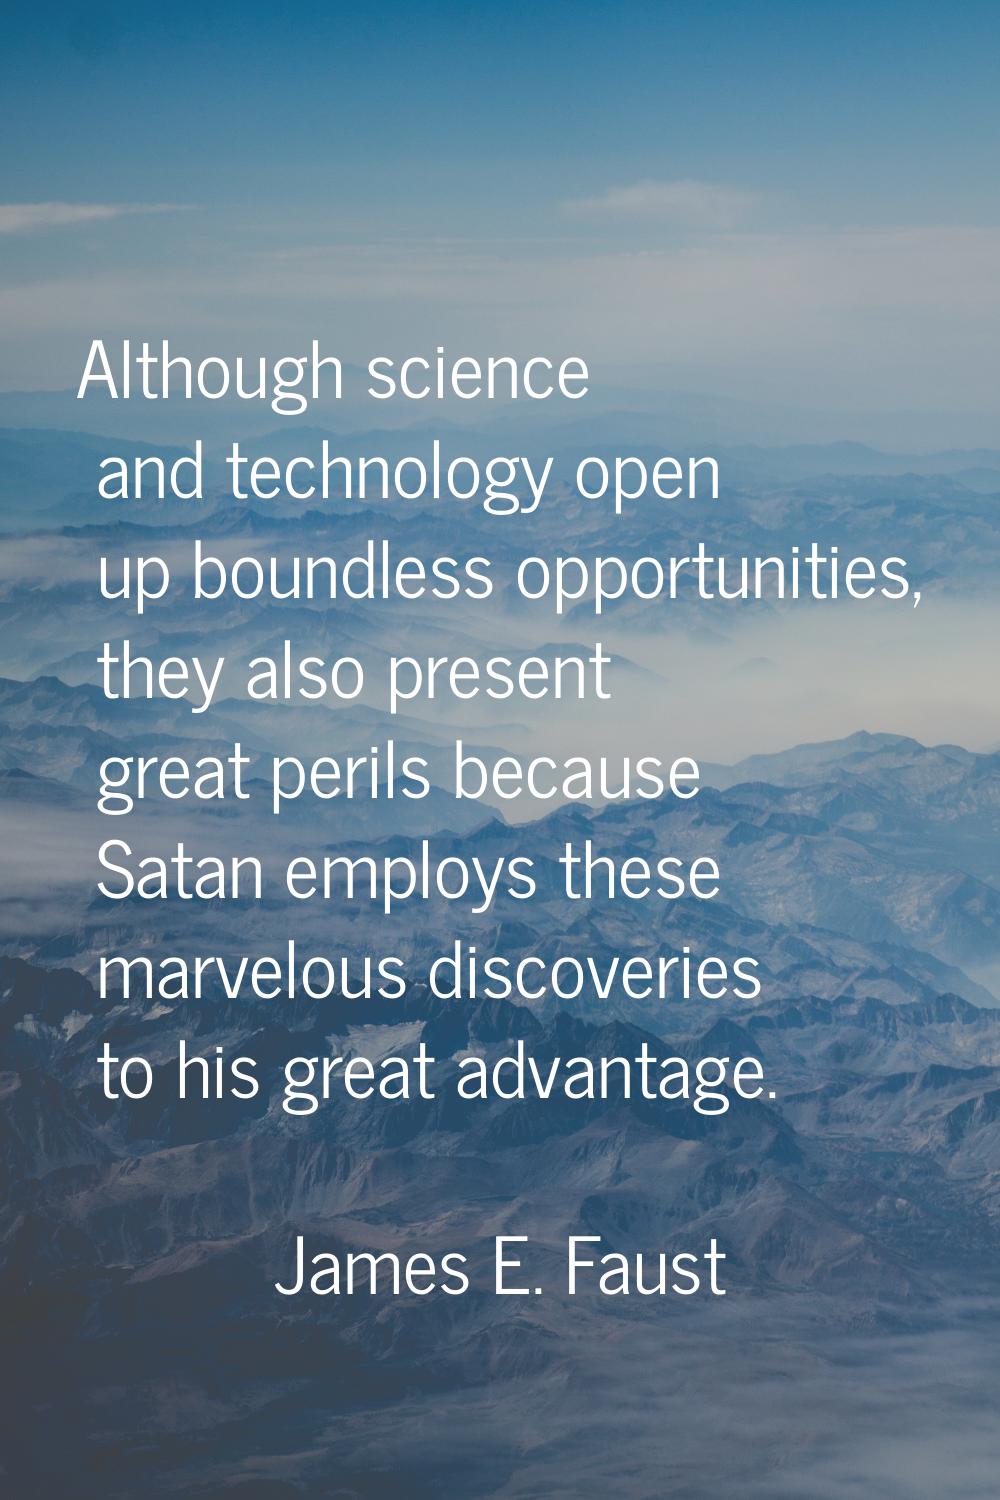 Although science and technology open up boundless opportunities, they also present great perils bec